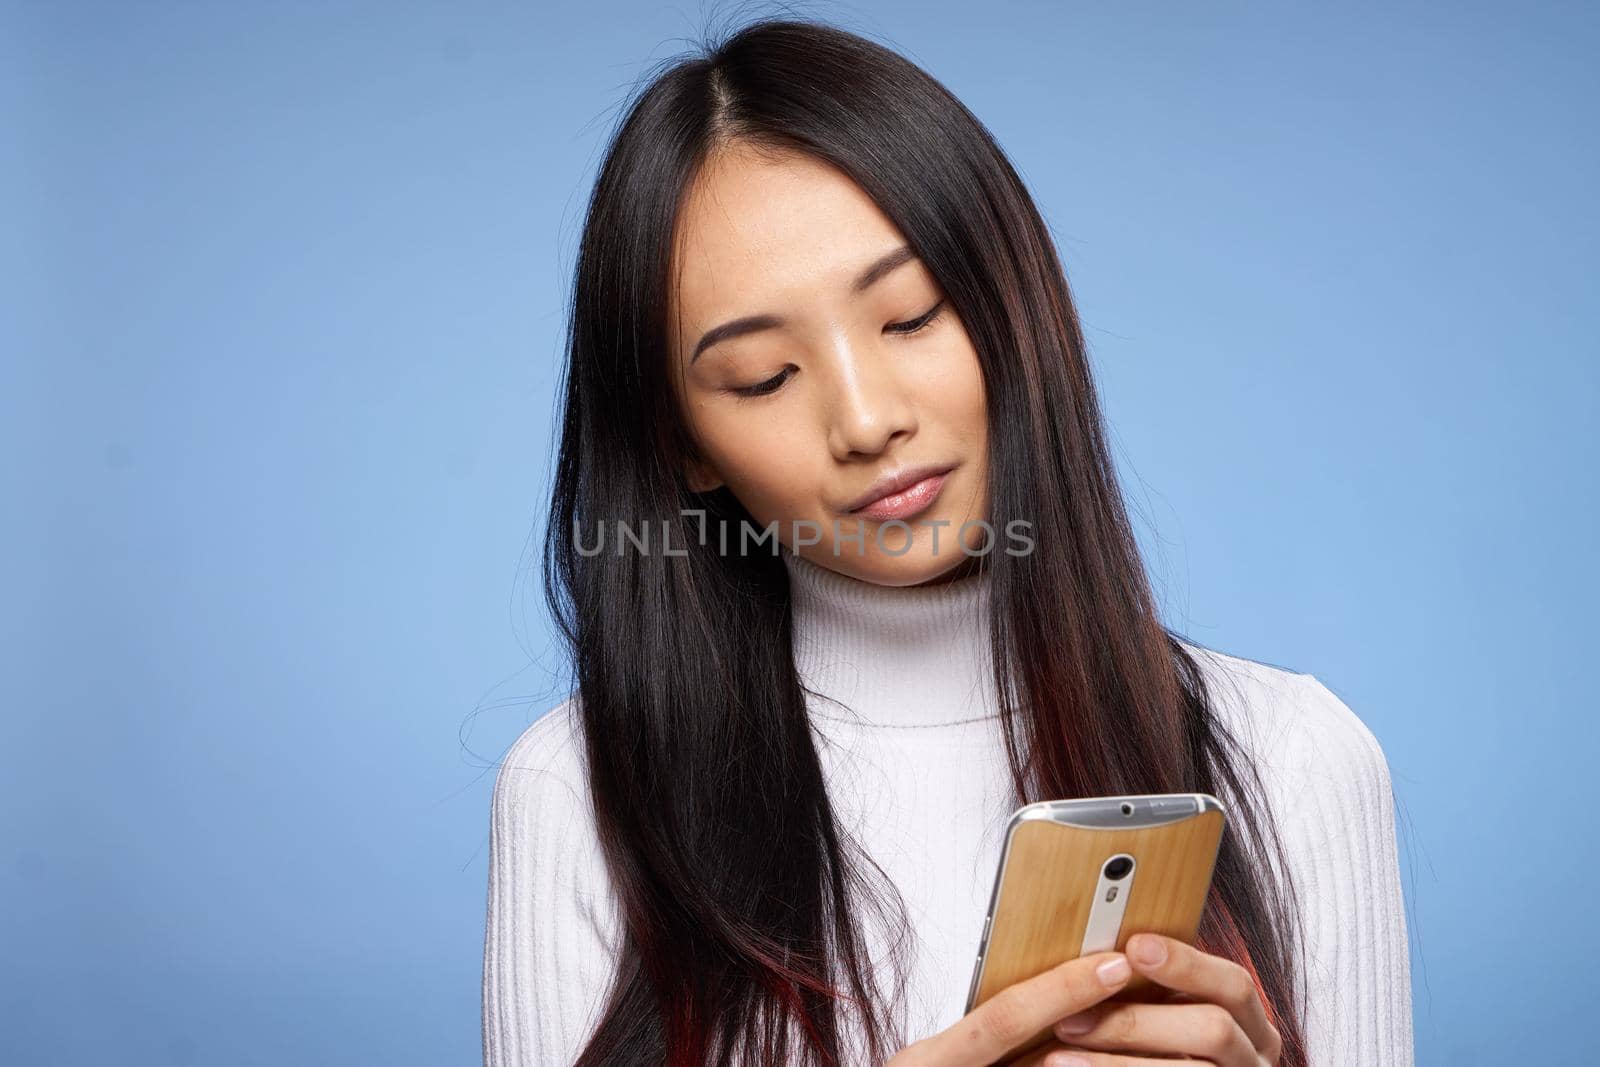 woman asian appearance phone hands communication technology lifestyle blue background. High quality photo